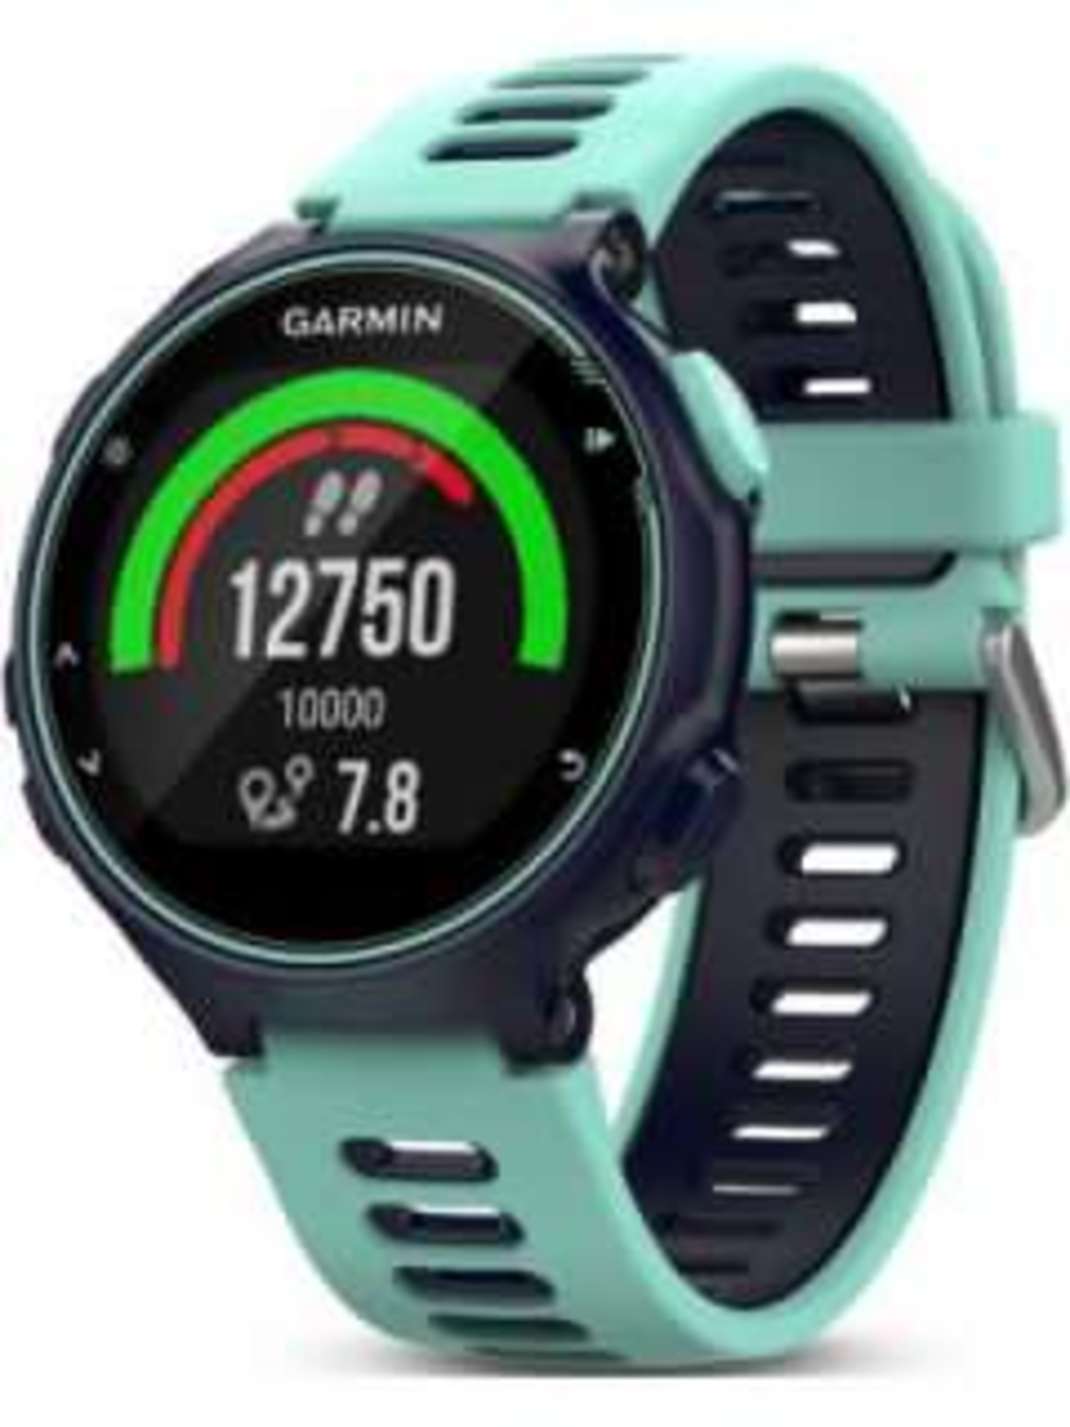 Compare Garmin Forerunner vs Garmin Forerunner 935 - Garmin 735XT vs Garmin Forerunner 935 Comparison by Price, Specifications, Reviews &amp; Features | Gadgets Now